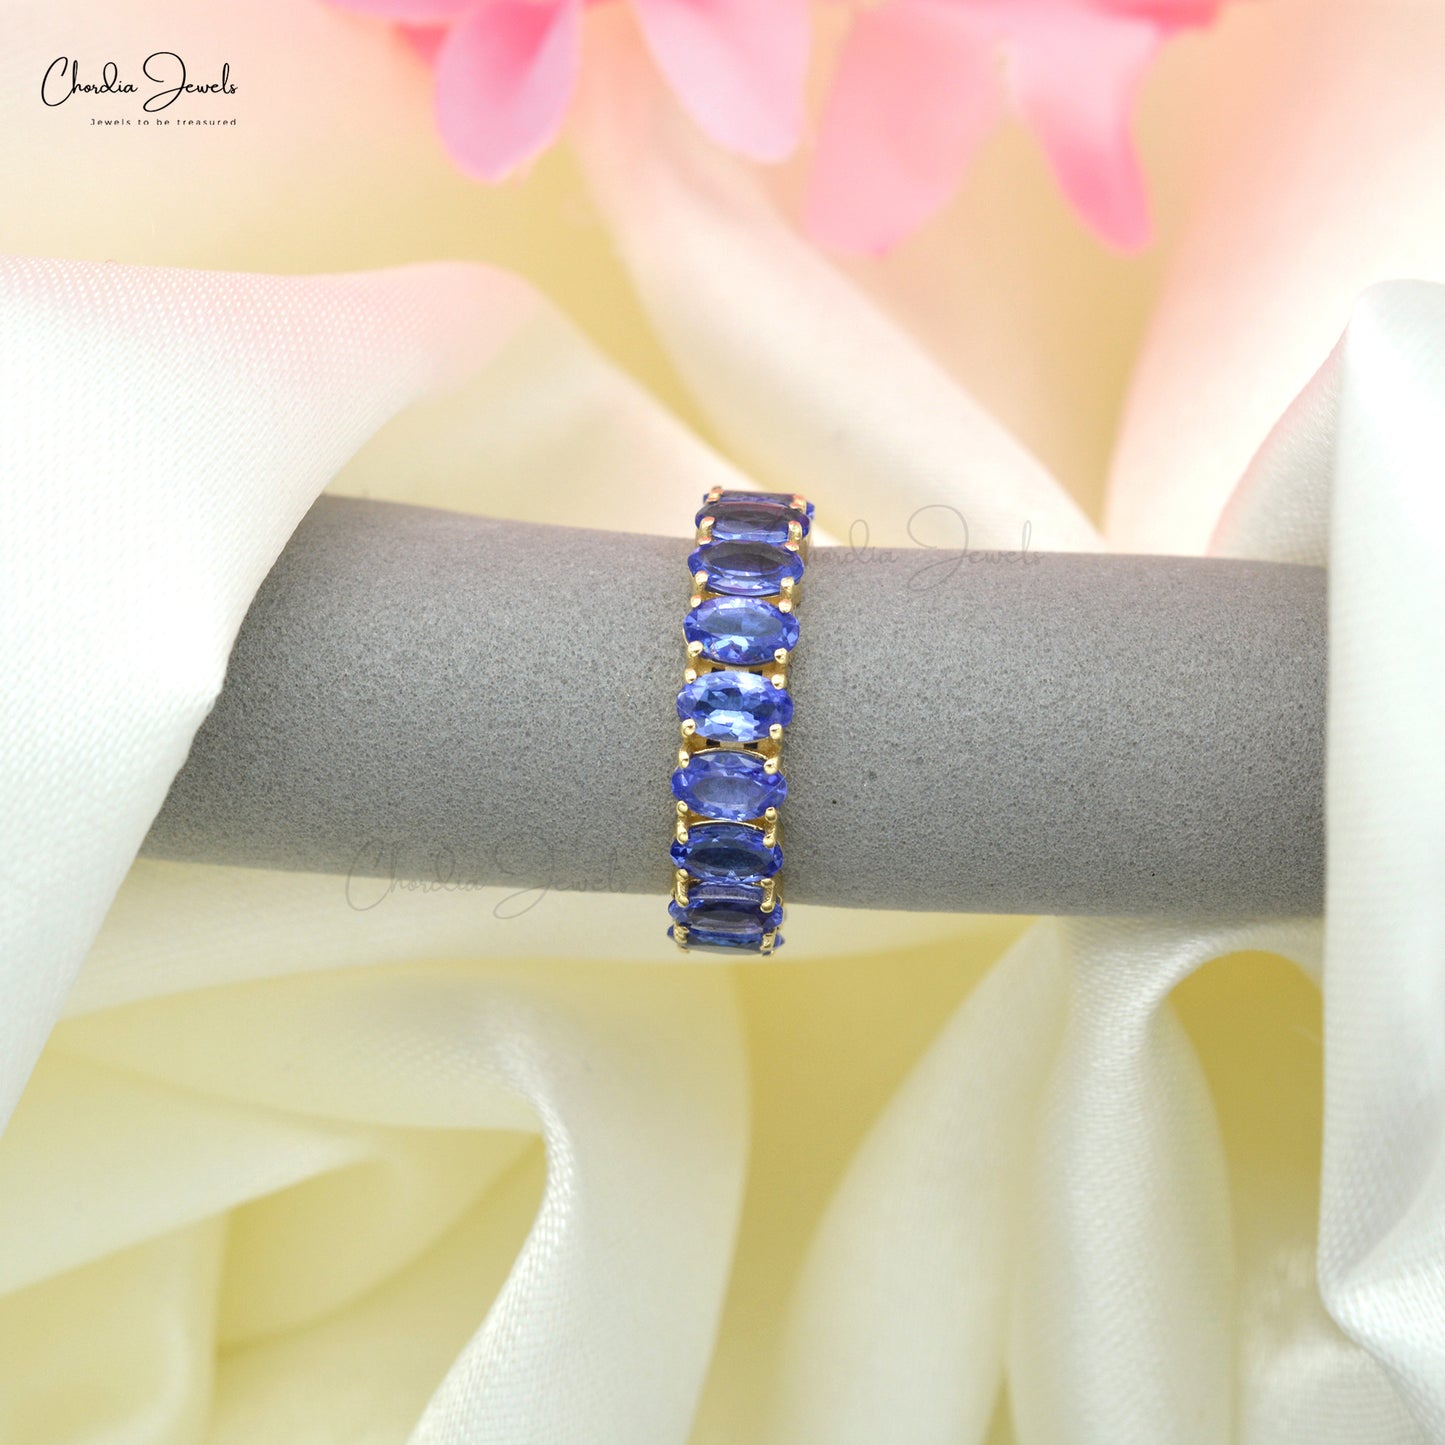 Load image into Gallery viewer, Solid 14k Yellow Gold Eternity Ring Genuine Tanzanite Gemstone Shared Prong Set Promise Ring
